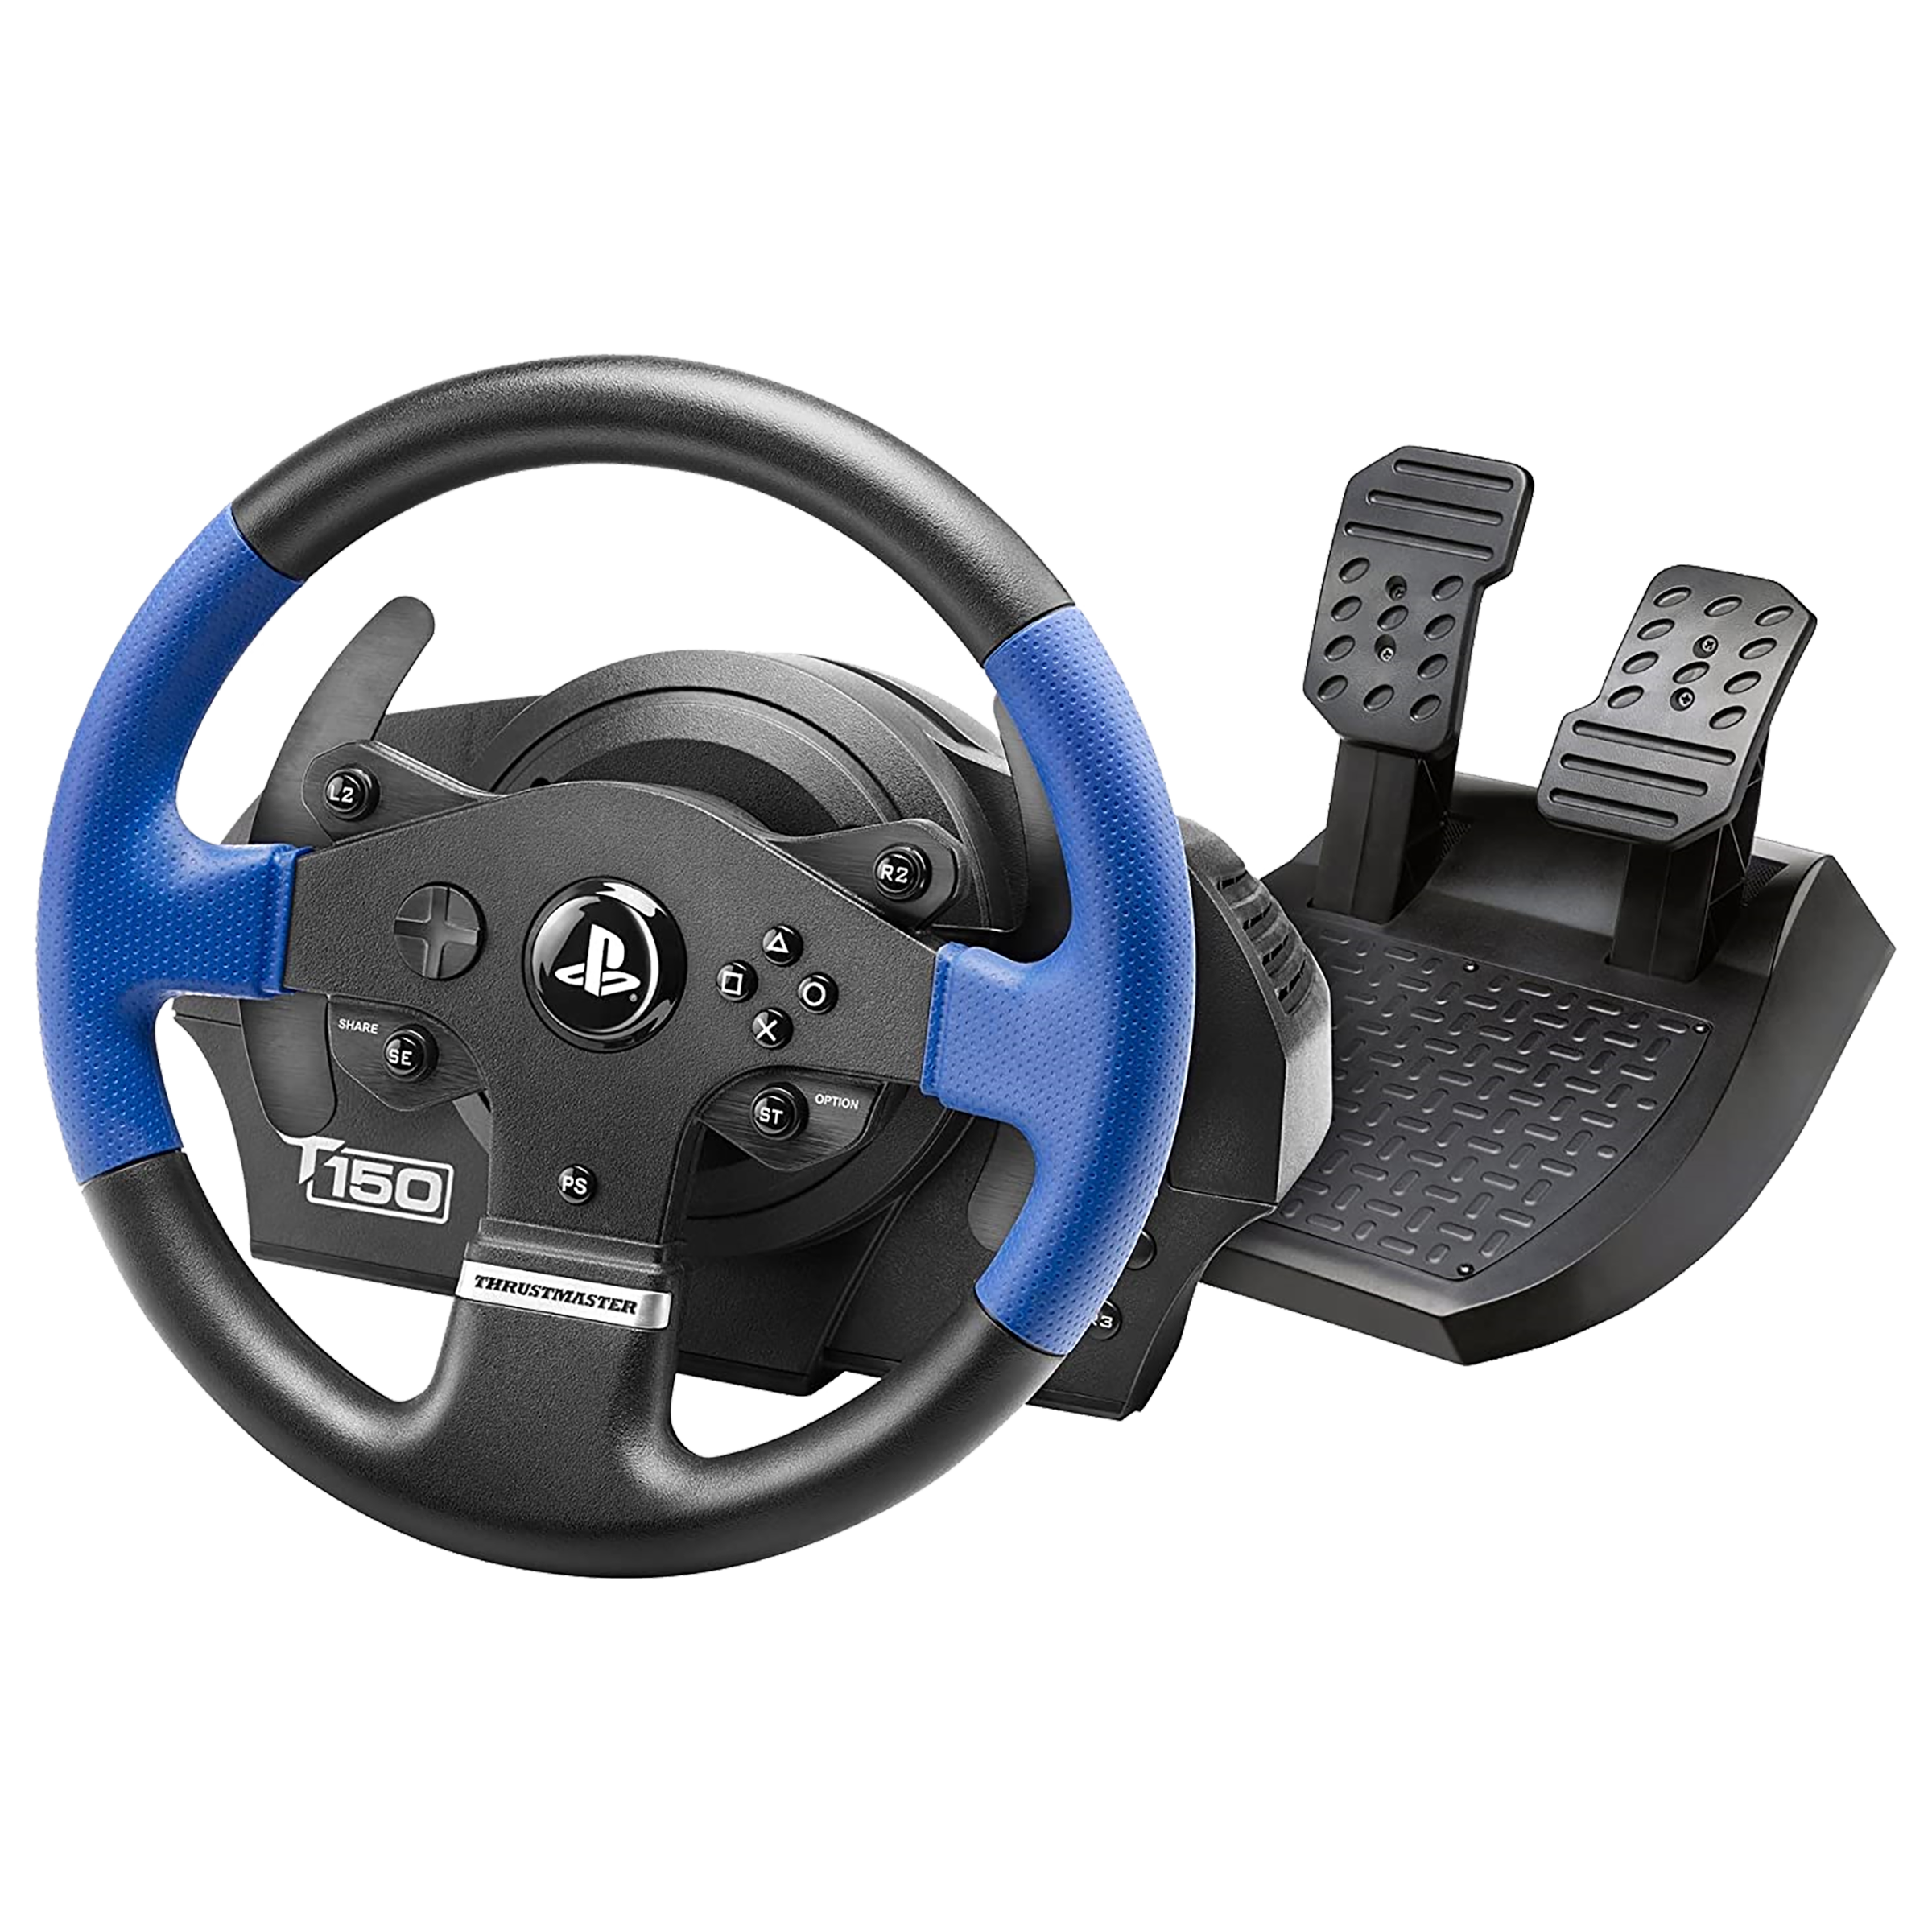 Thrustmaster T150 FFB Racing Wheel For PS3 / PS4 / PC (1080° Wheel Rotation, Blue/Black)_1